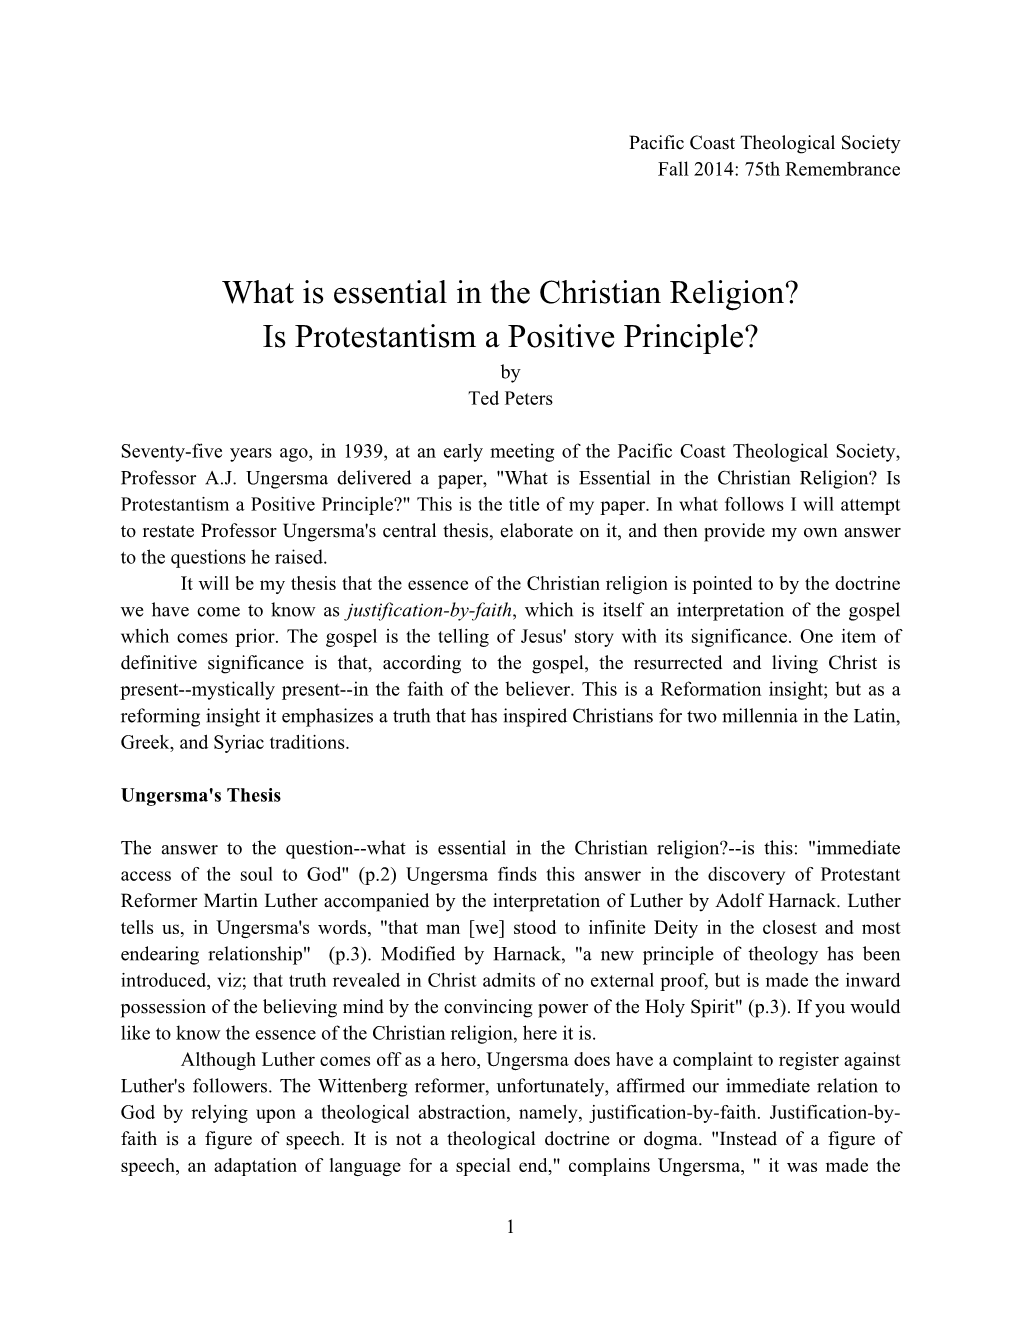 What Is Essential in the Christian Religion? Is Protestantism a Positive Principle? by Ted Peters